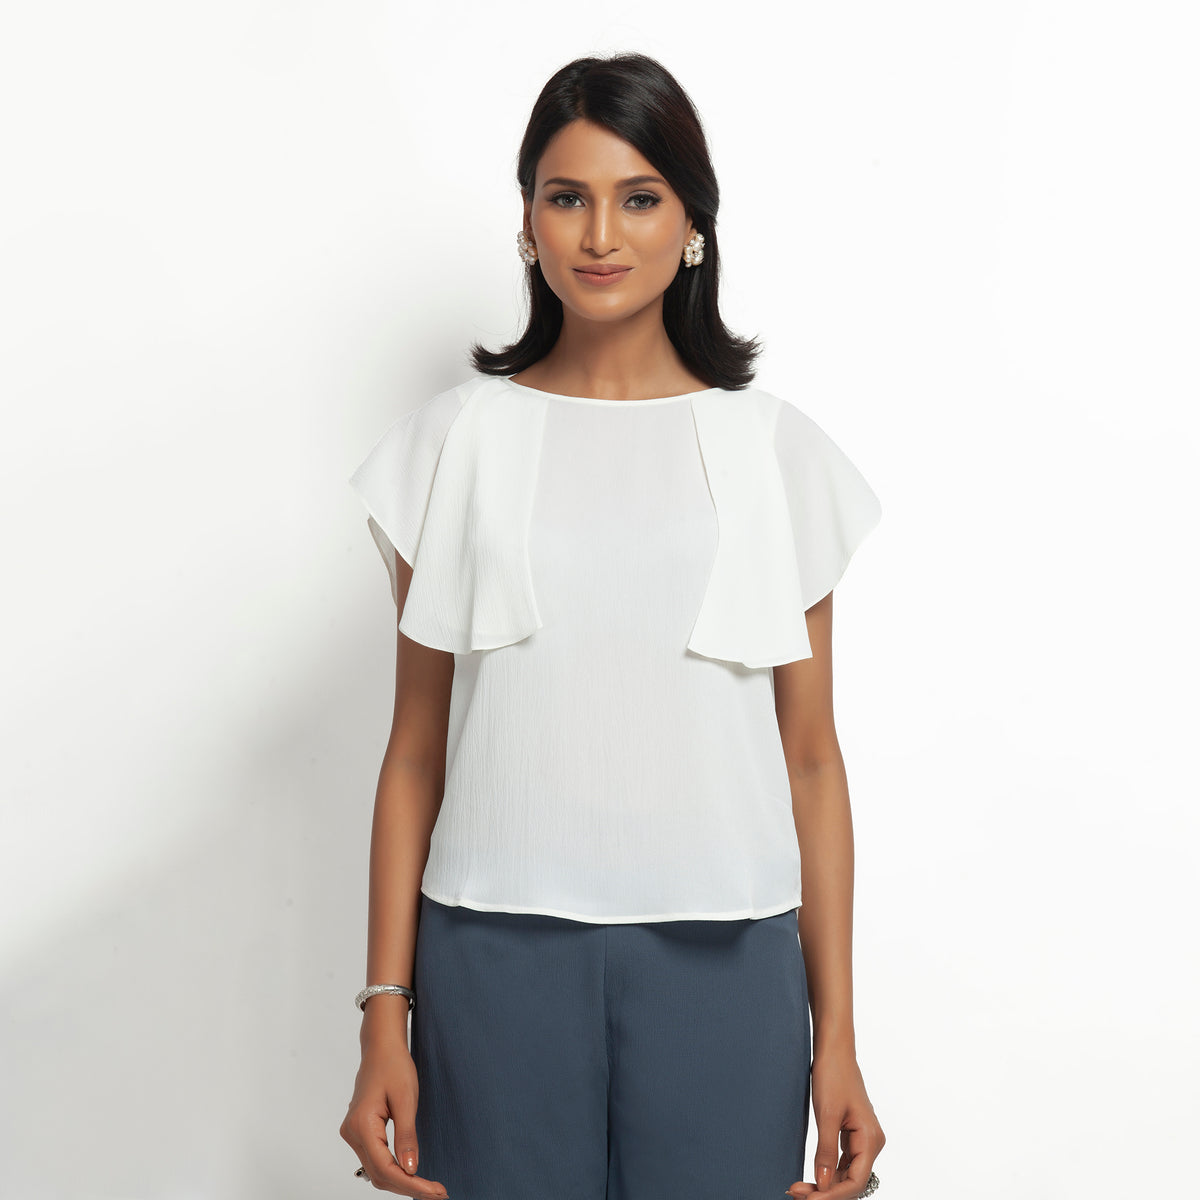 White Crepe Top With Drape Shoulder